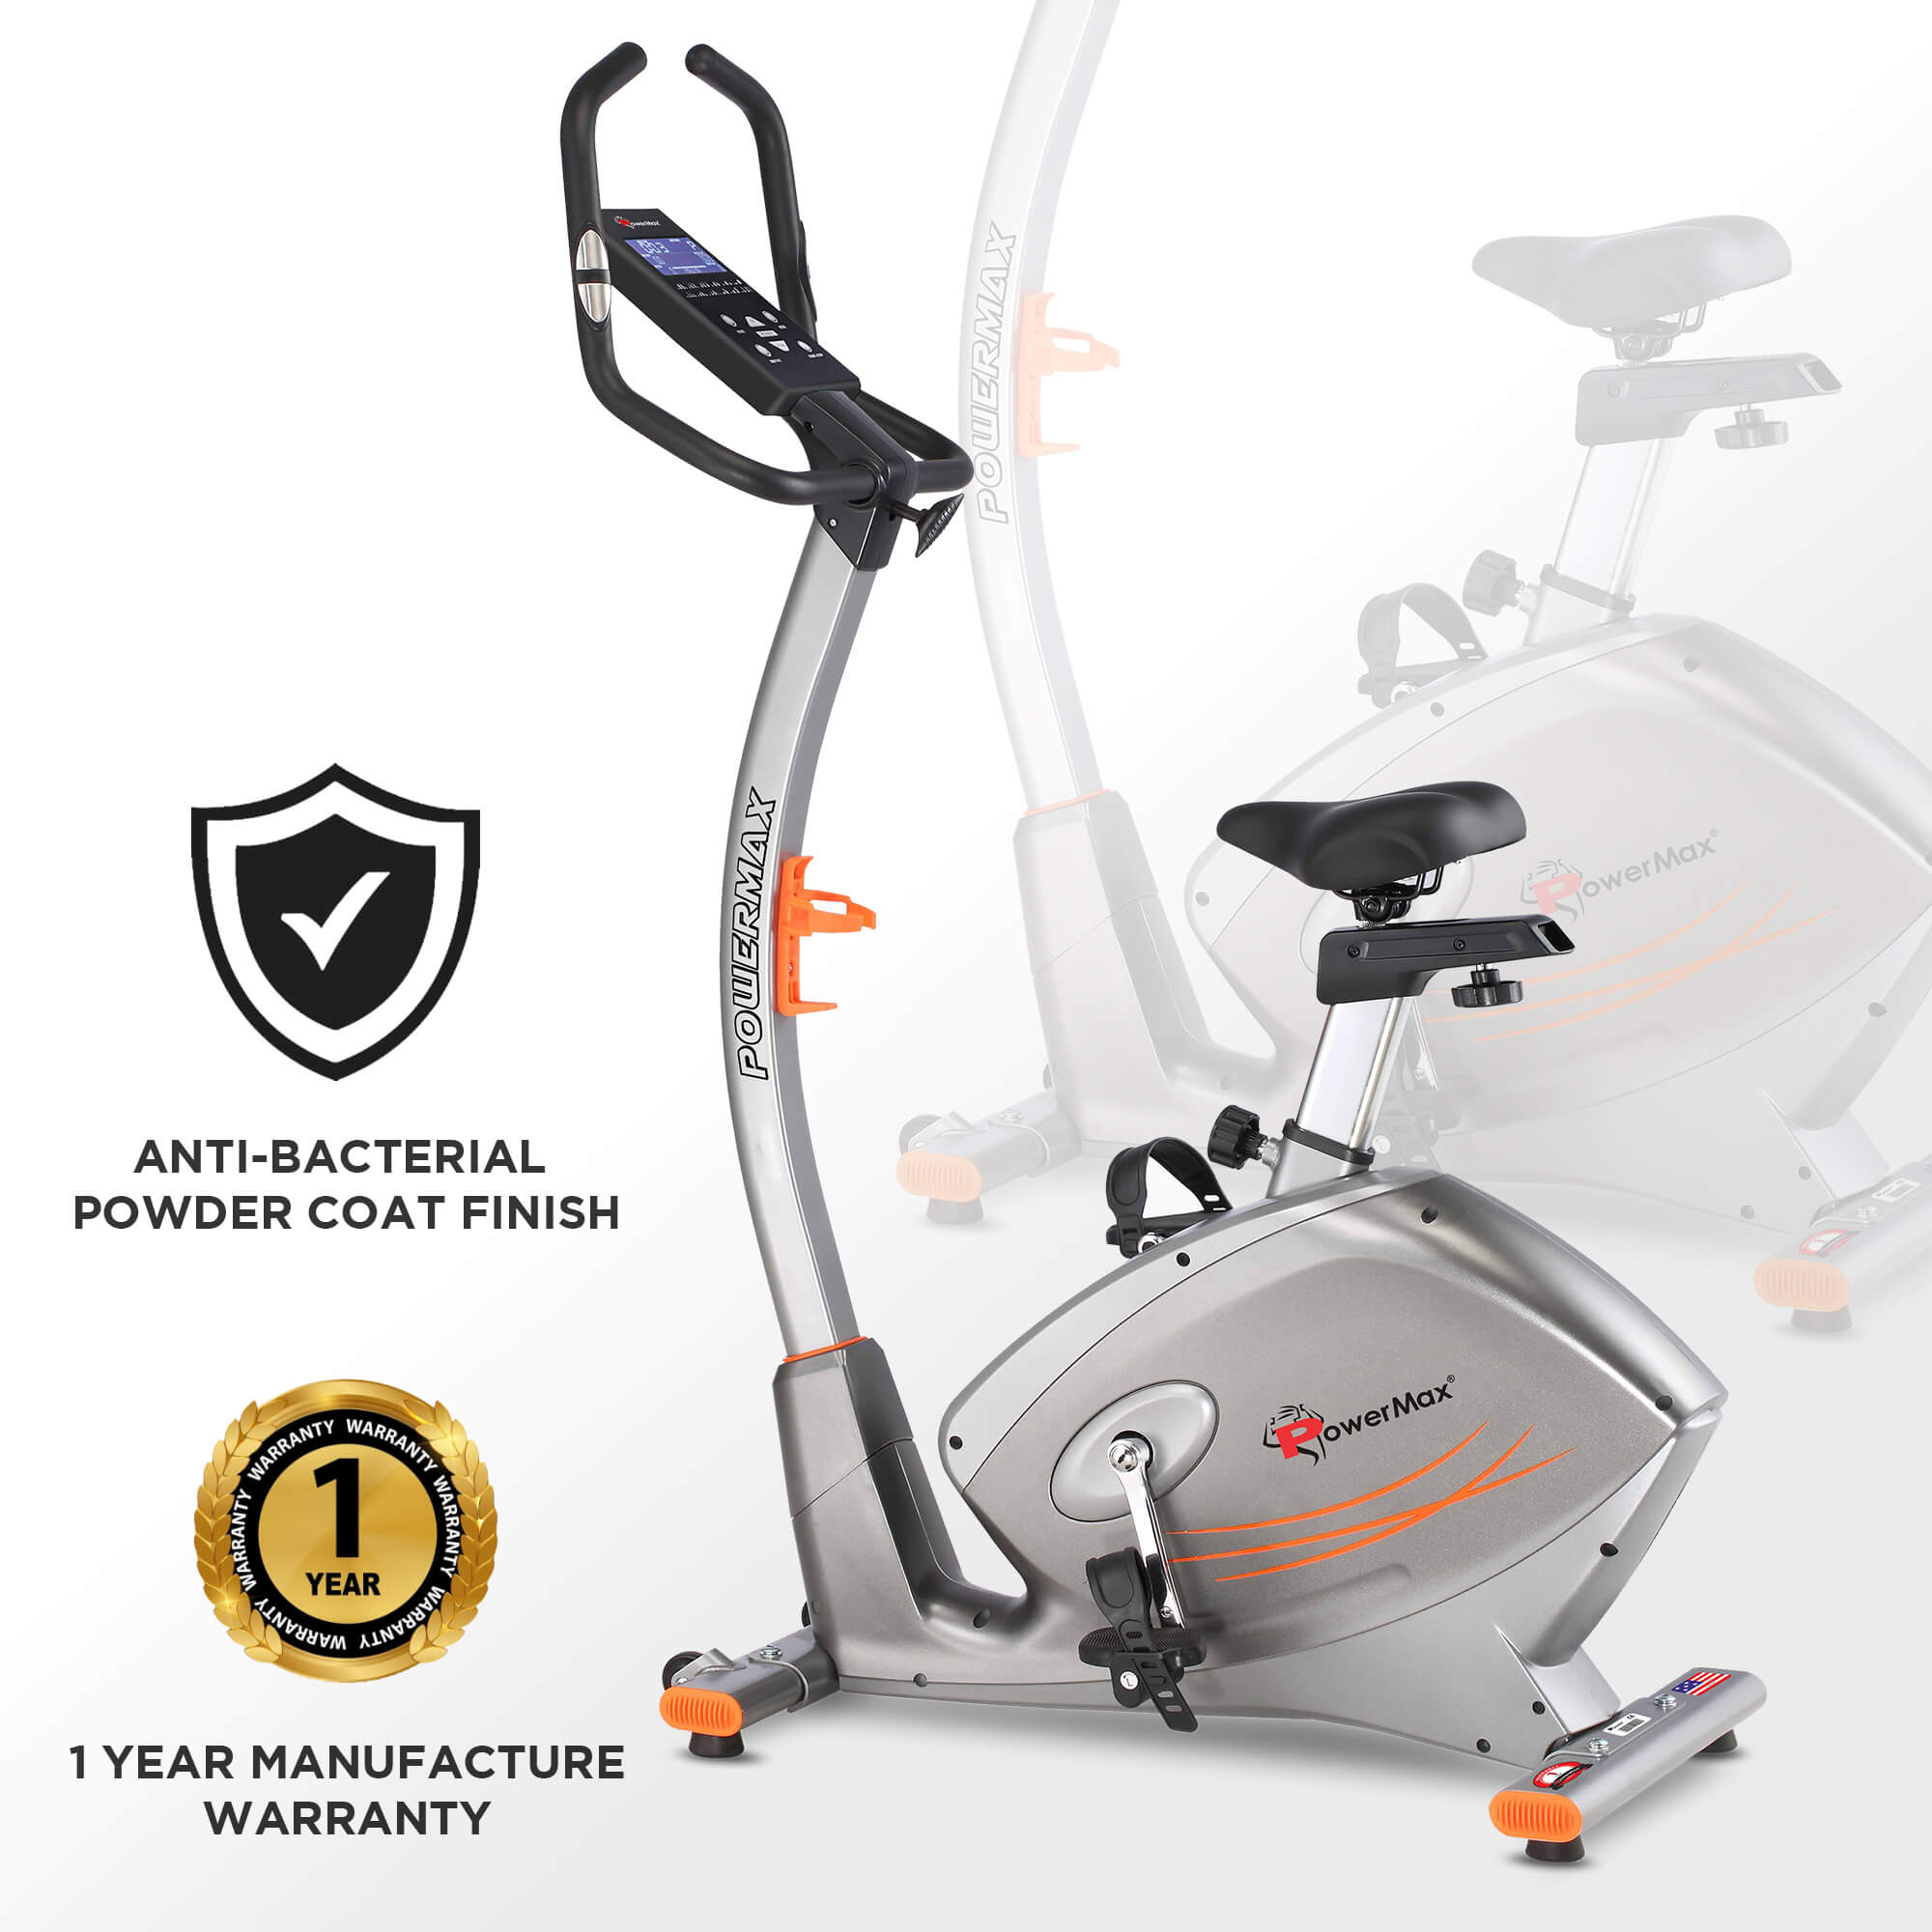 PowerMax Fitness BU-750 Upright Exercise Bike with Hand Pulse, Water Bottle Cage for Home Use